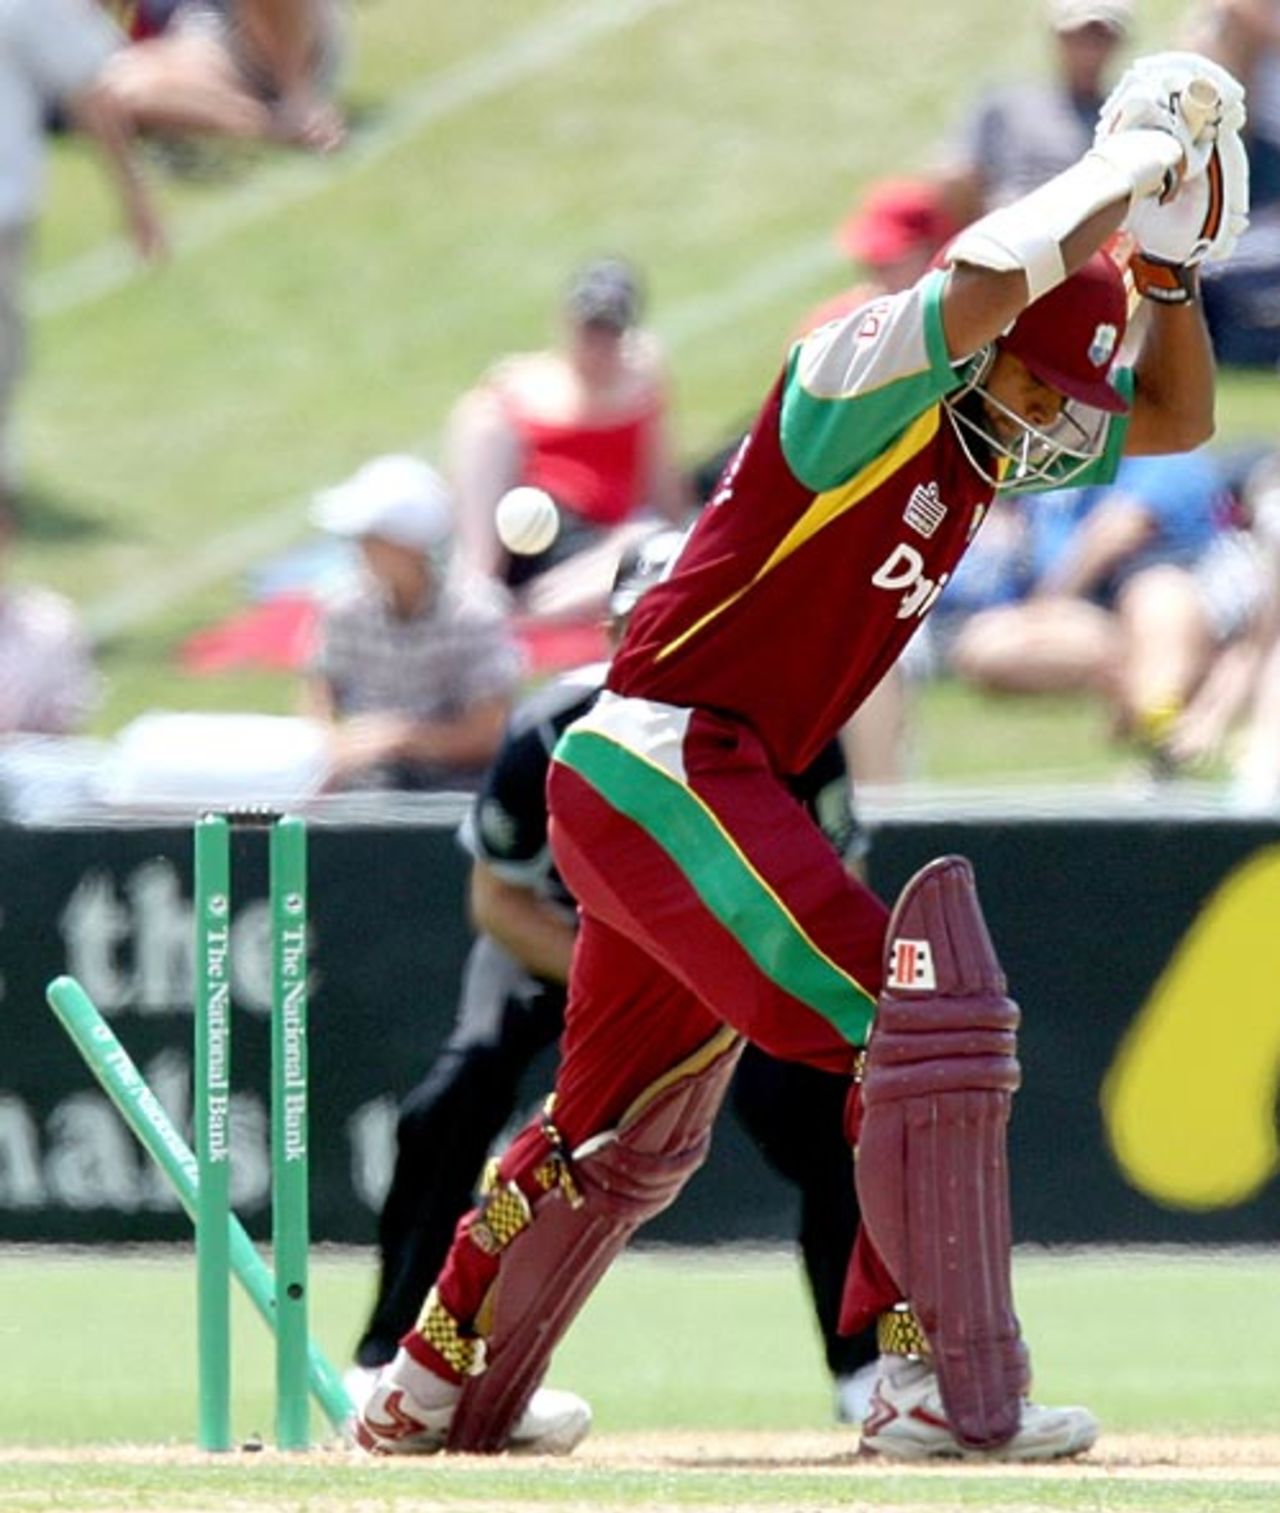 Sewnarine Chattergoon is done in by Kyle Mills, New Zealand v West Indies, 5th ODI, Napier, January 13, 2009